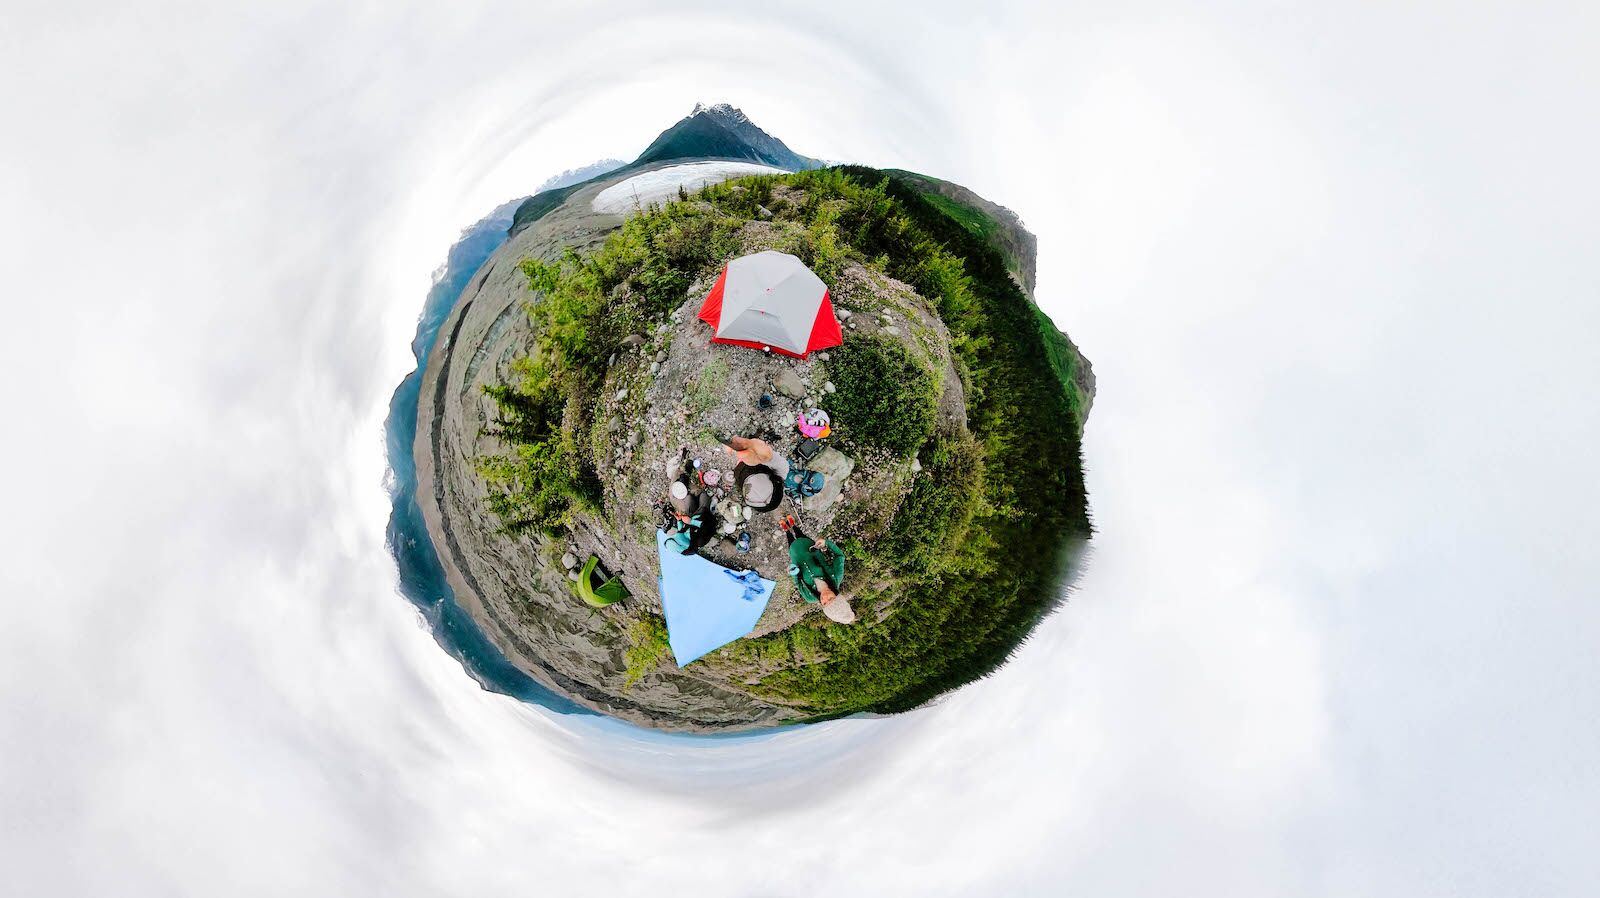 The GoPro 360 Max, from my campsite